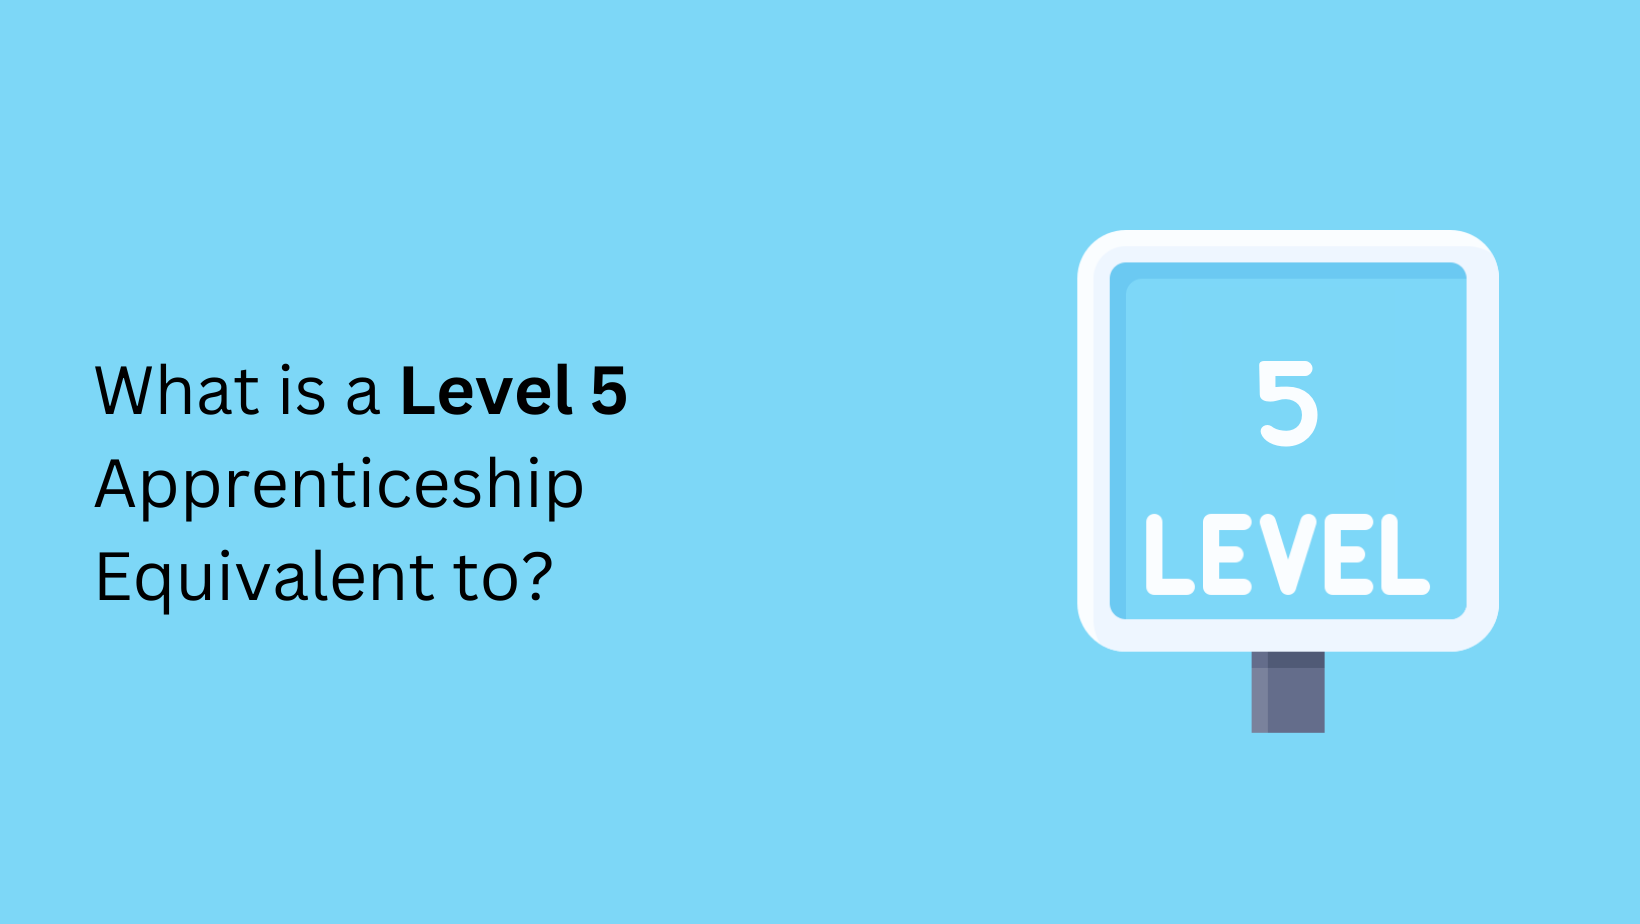 What is a Level 5 Apprenticeship Equivalent to